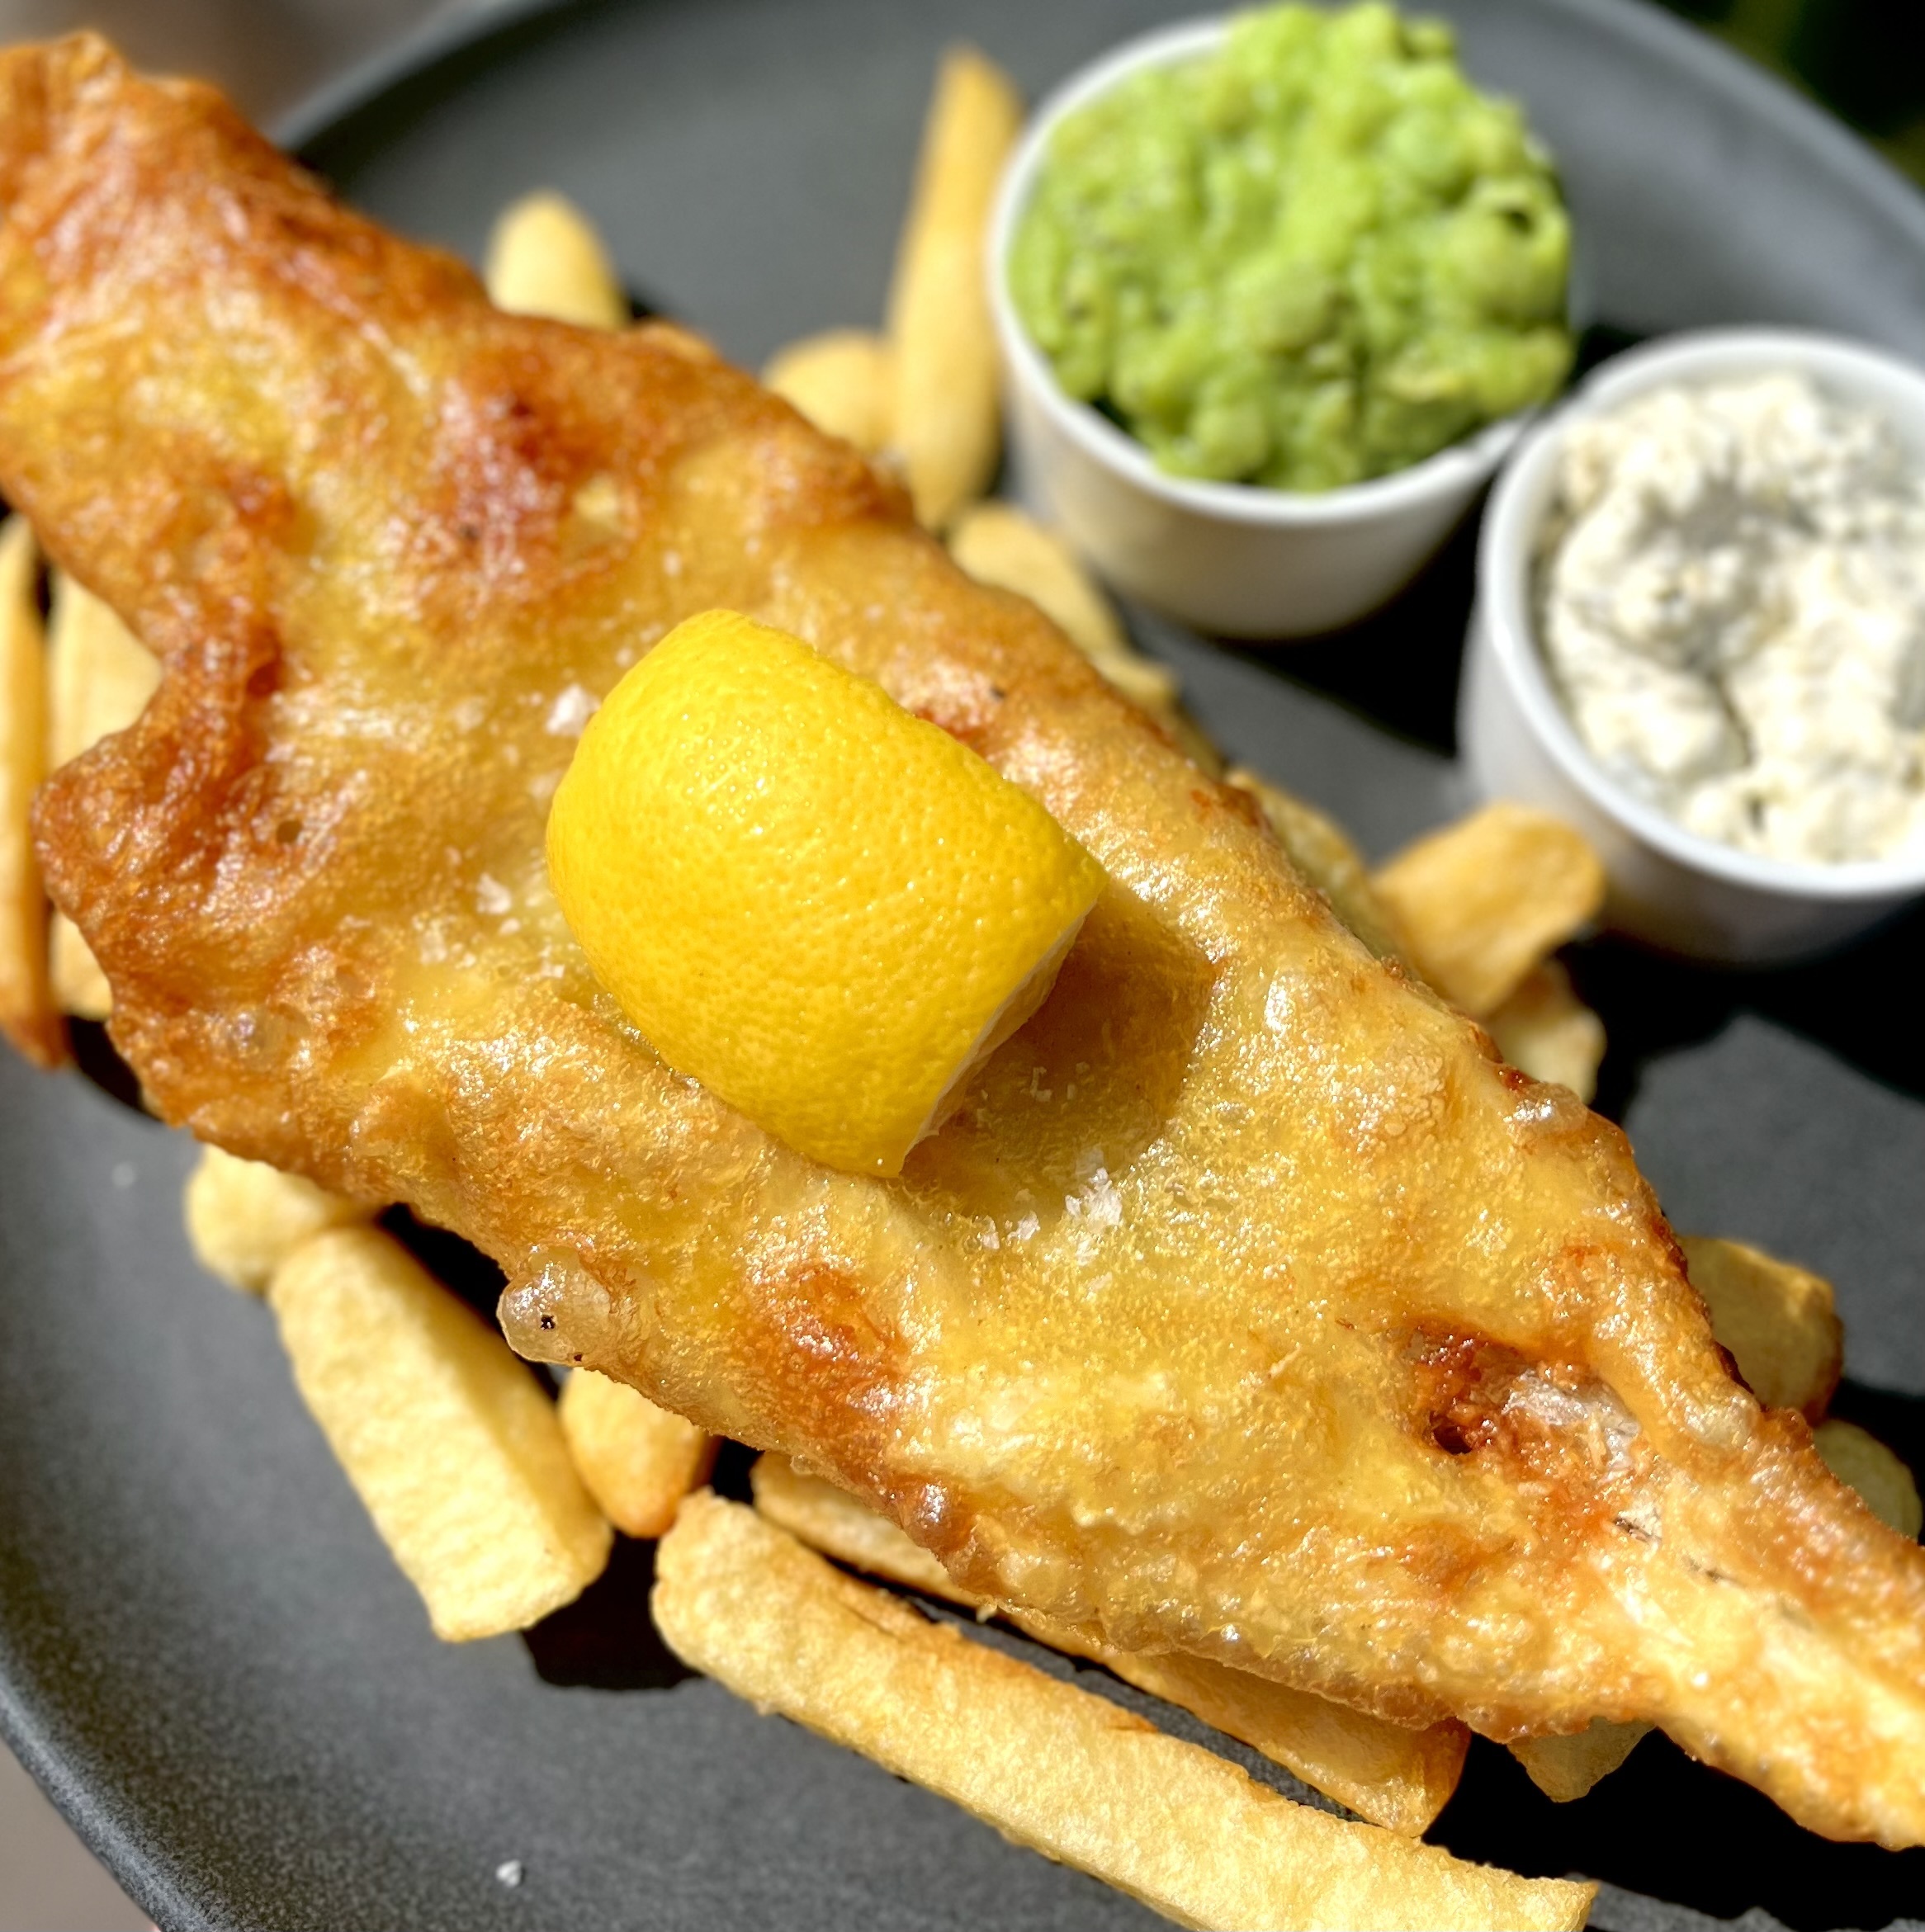 Fish and chips is popular any day of the week - not just on Fridays